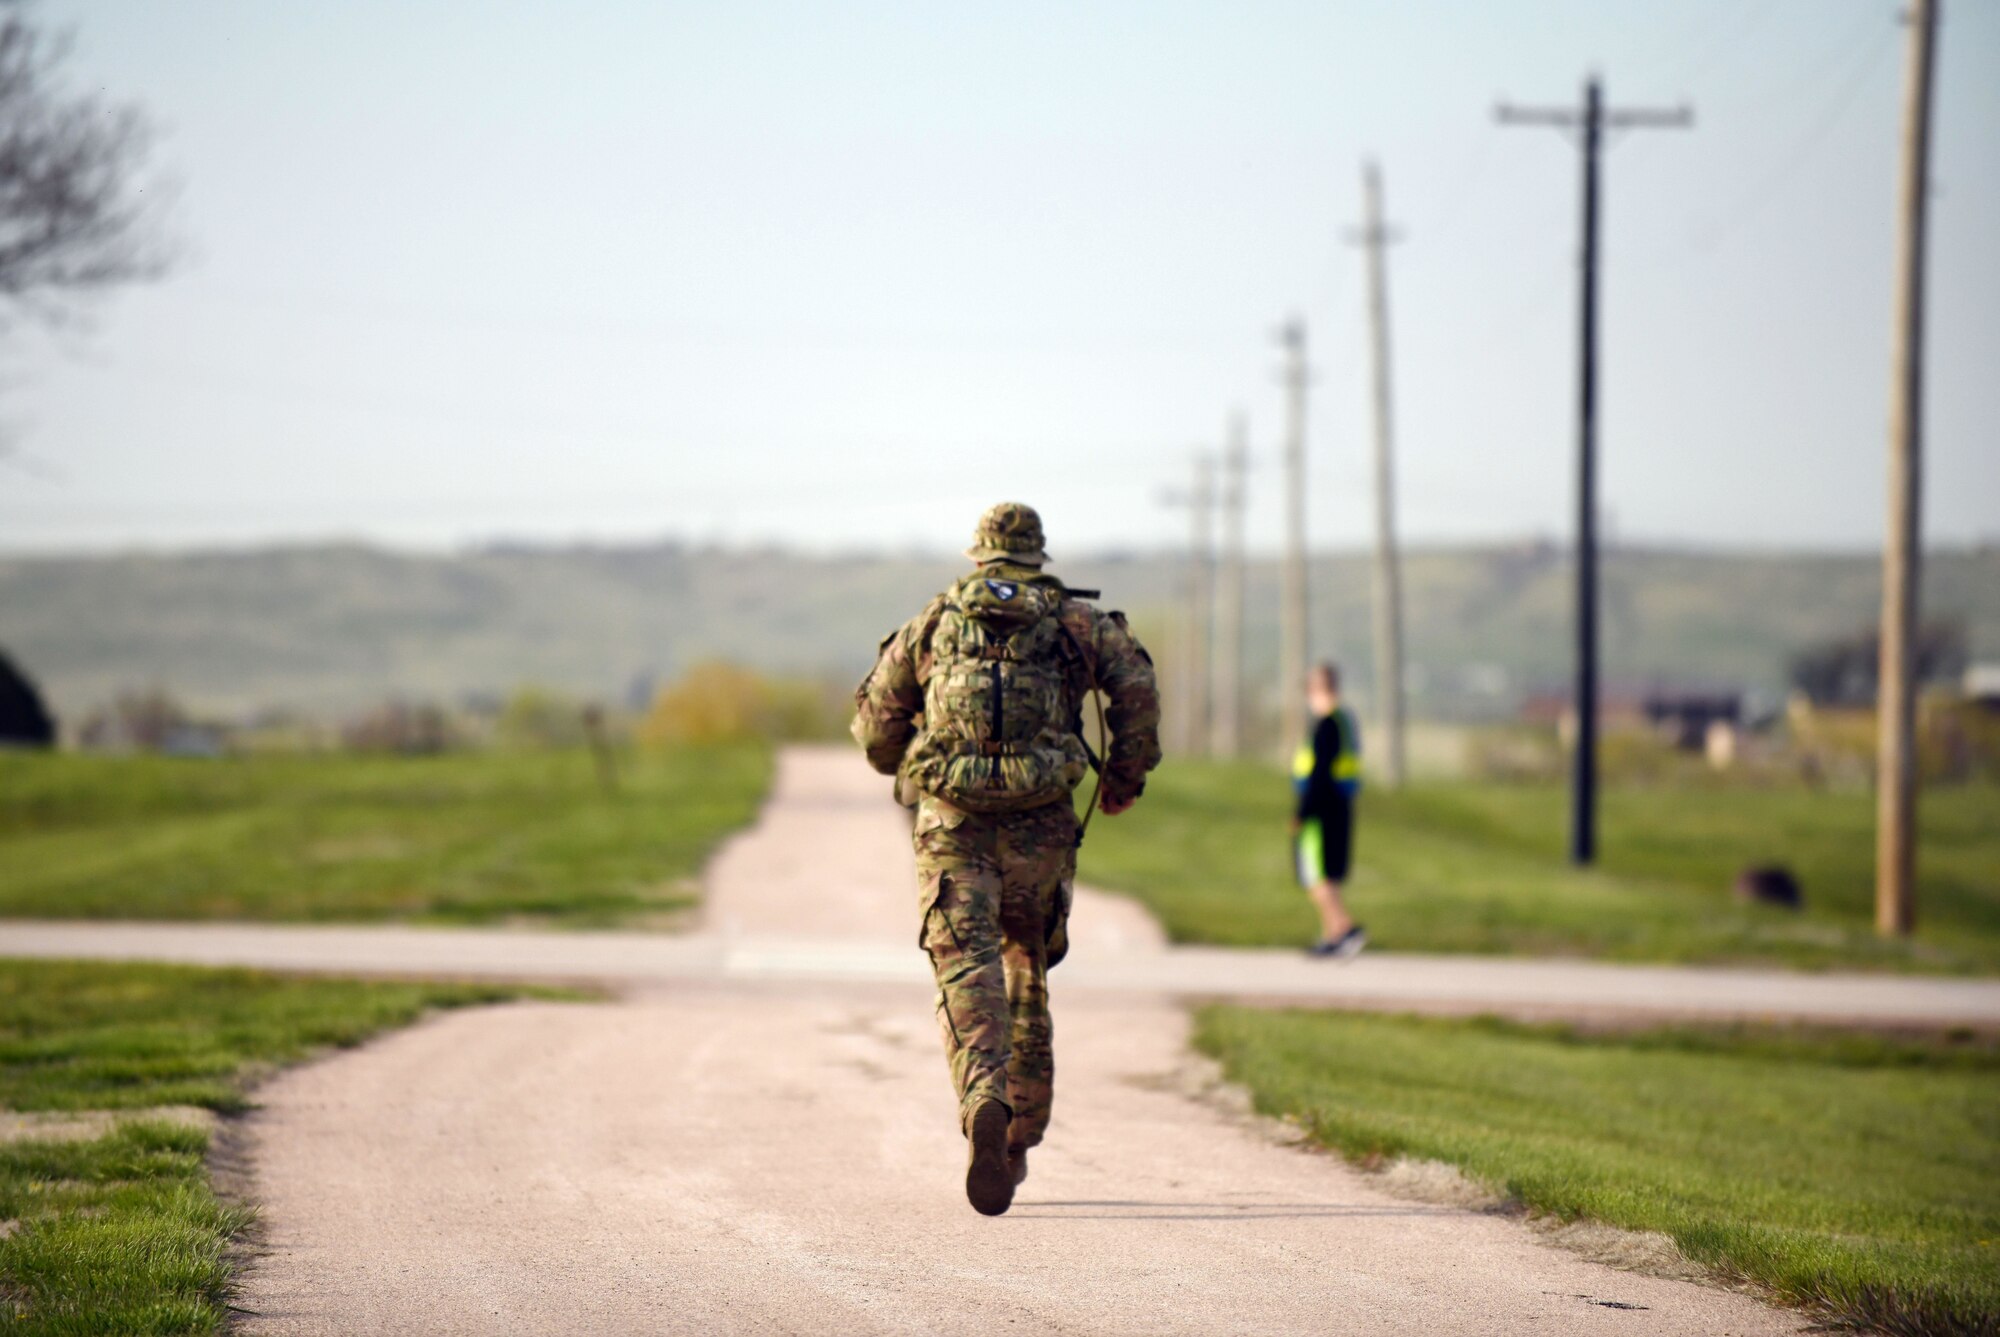 An Airman participates in the 4.5-mile Police Week Ruck Challenge at Heritage Lake on Ellsworth Air Force Base, S.D., May 13, 2019. The event was organized by the 28th Security Forces Squadron in honor of National Police Week. The week is dedicated to the countless numbers of law enforcement officers who have died while serving and protecting communities nationwide. (U.S. Air Force photo by Airman 1st Class Christina Bennett)